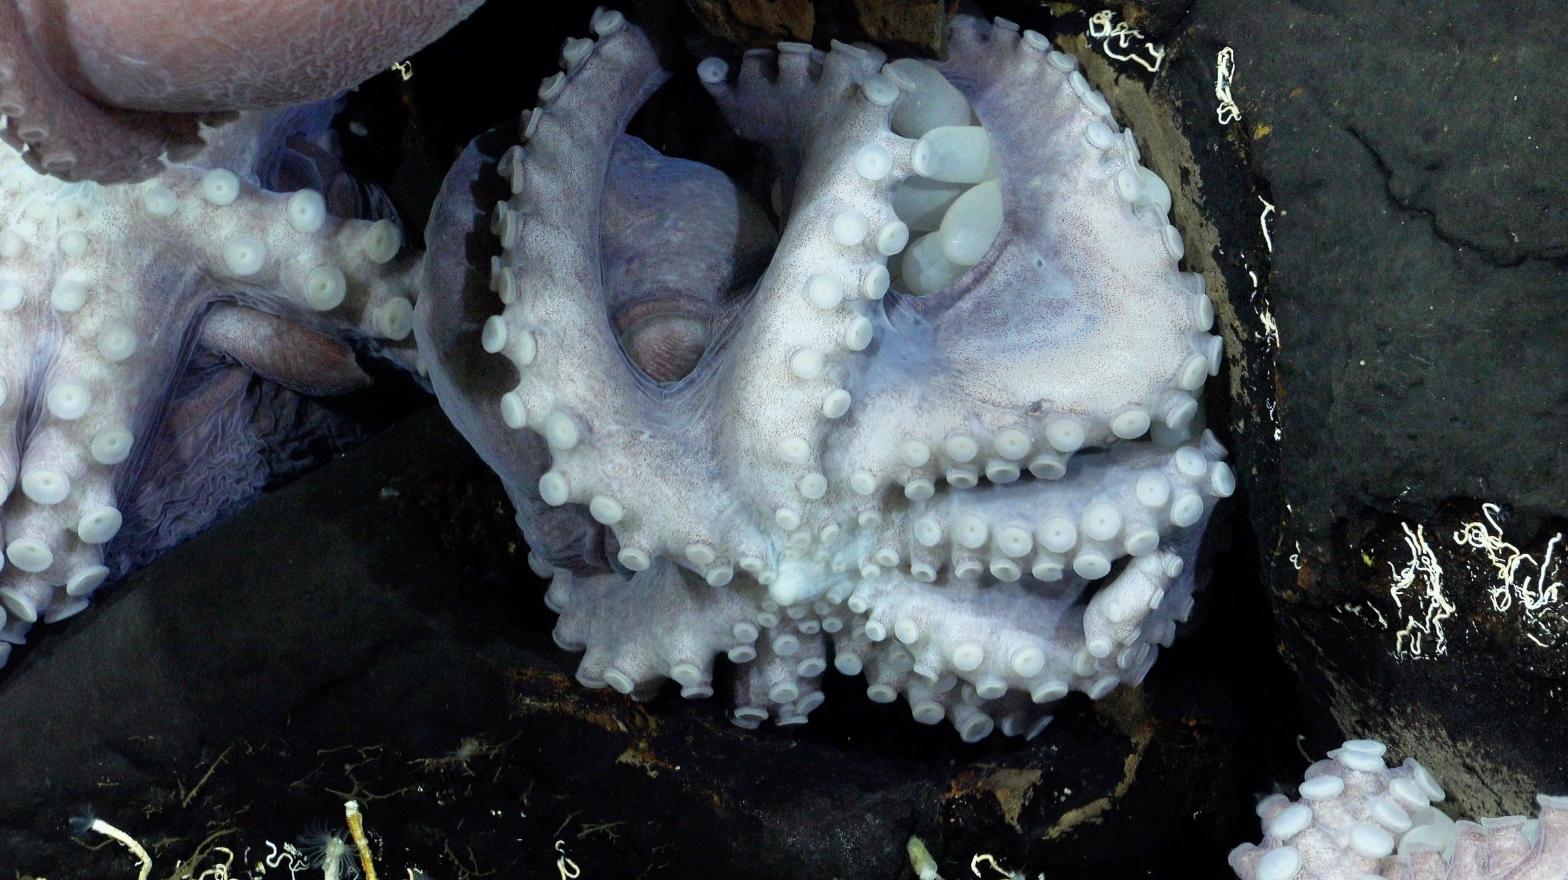 The team's expedition found hundreds of octopuses protecting viable eggs in the Dorado Outcrop near Costa Rica. (Image: Schmidt Ocean Institute)